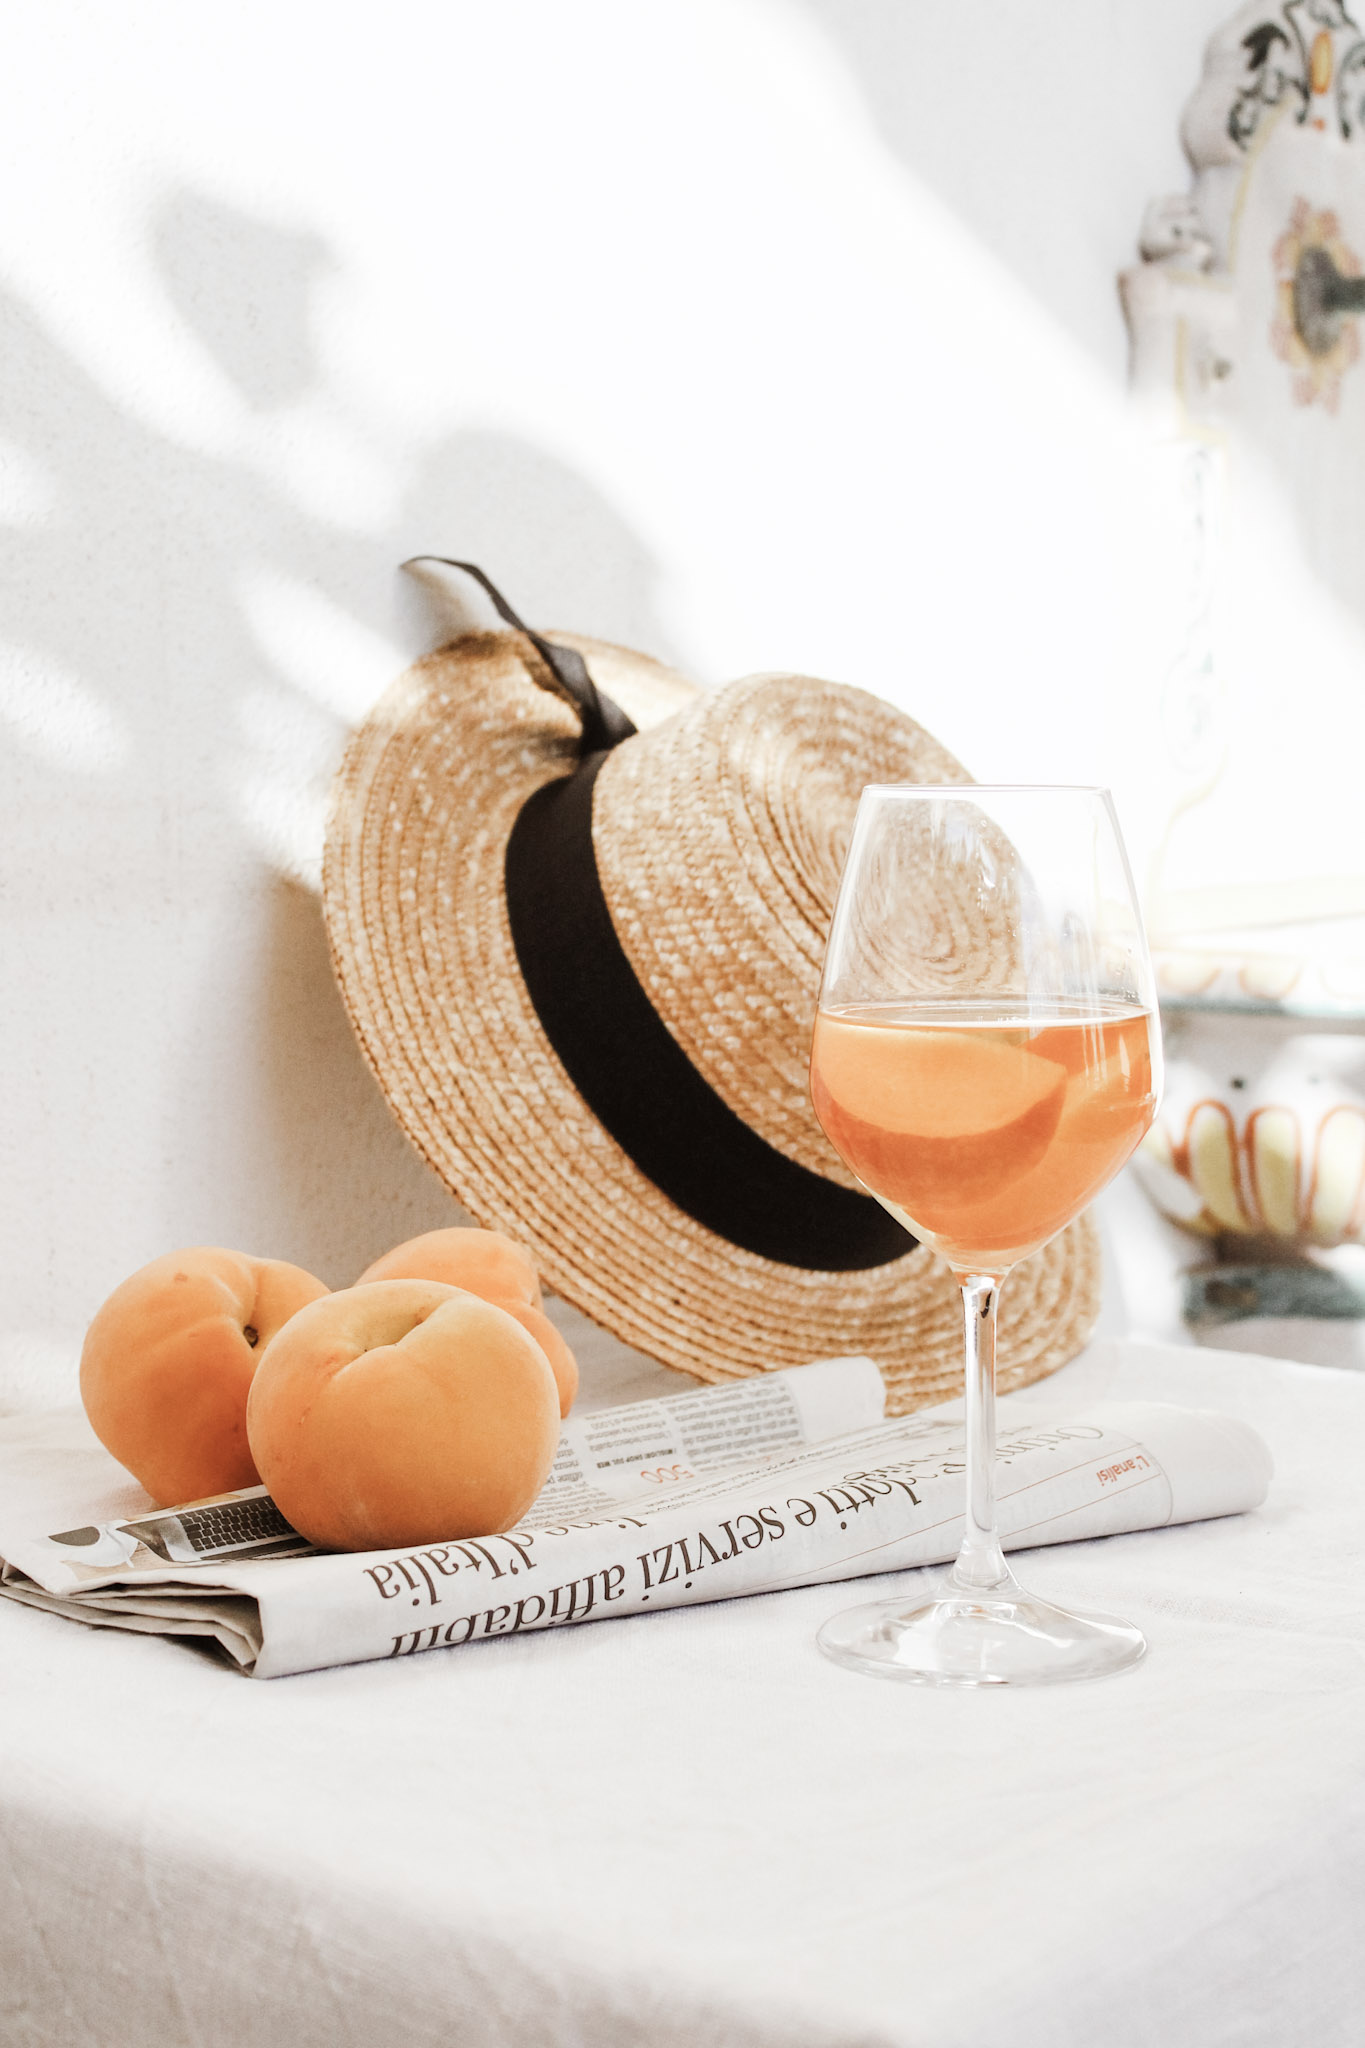 Beyond Red and White: The Exciting World of Orange Wines